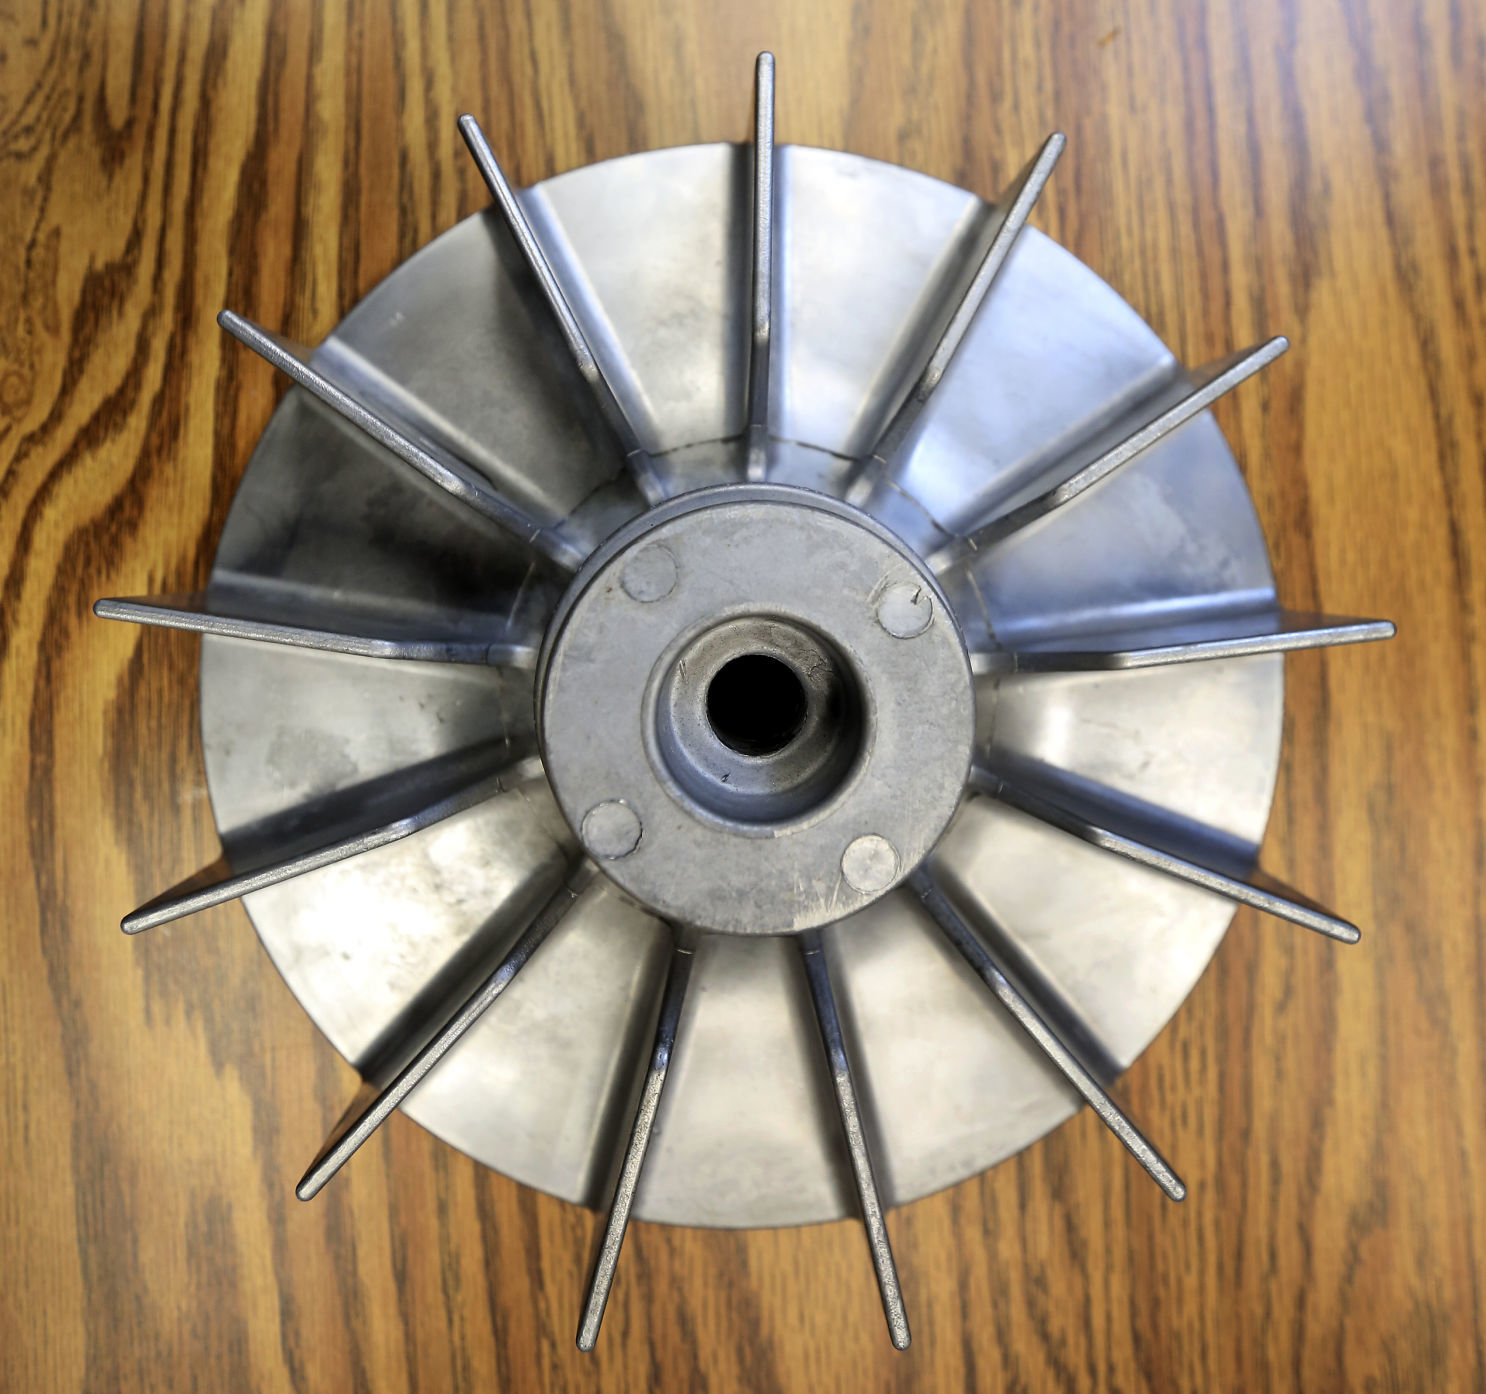 A component of an automotive fan manufactured by Lund Manufacturing in Farley, Iowa. Photo taken on Thursday, Jan. 25, 2018.    PHOTO CREDIT: NICKI KOHL